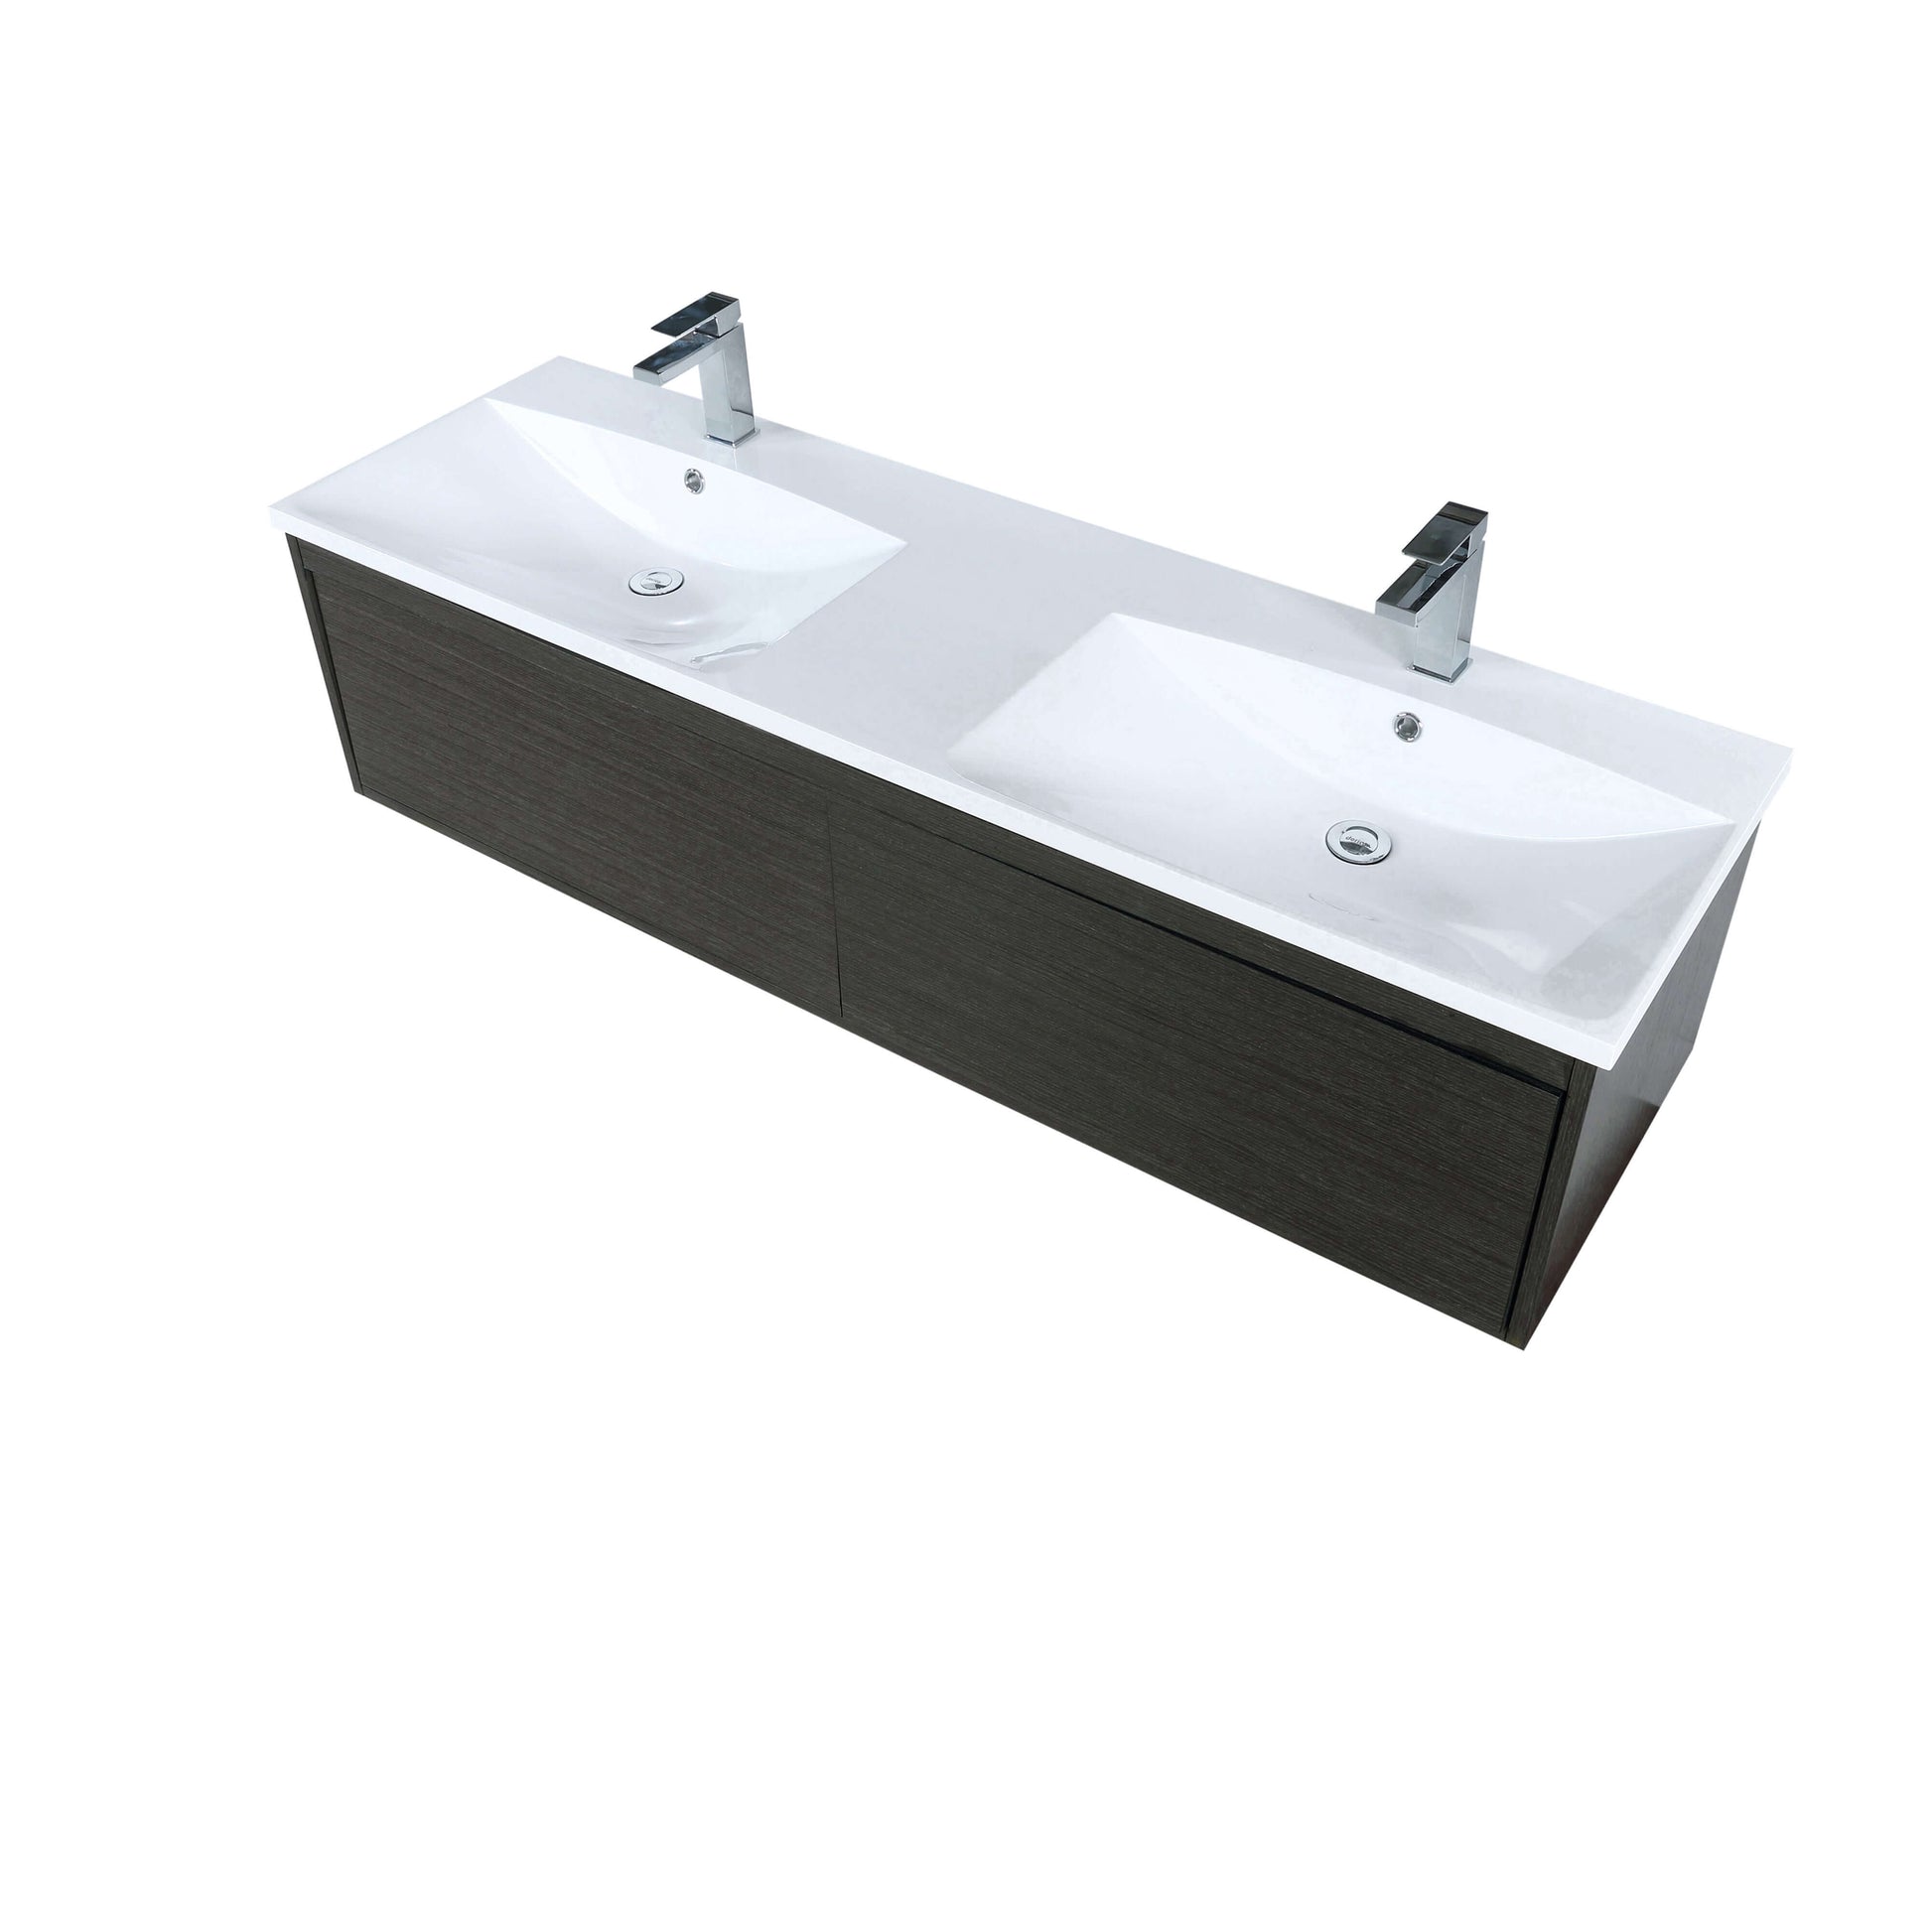 Sant 60" Iron Charcoal Double Bathroom Vanity, Acrylic Composite Top with Integrated Sinks, and Labaro Brushed Nickel Faucet Set - LS60DRAIS000FBN